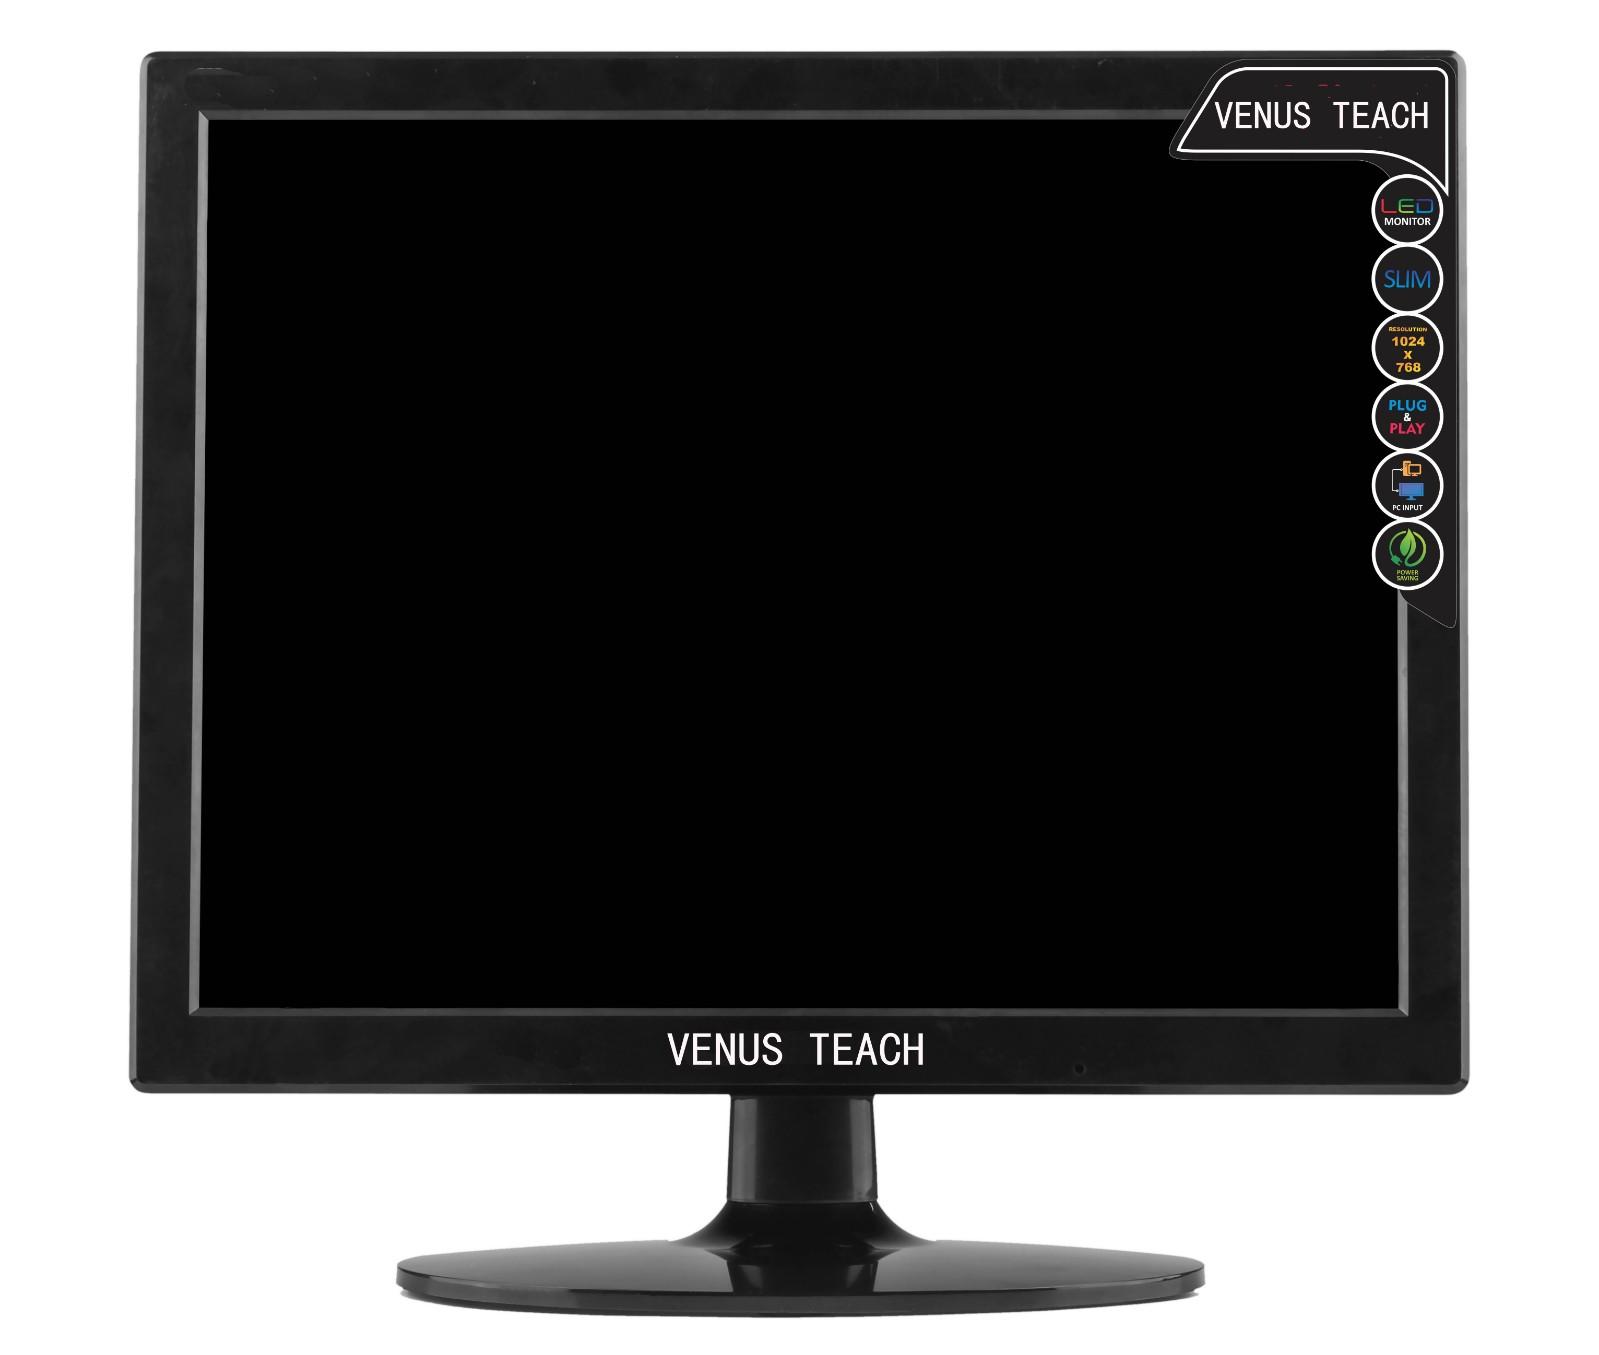 professional design 15 inch tft lcd monitor with hdmi output for lcd screen